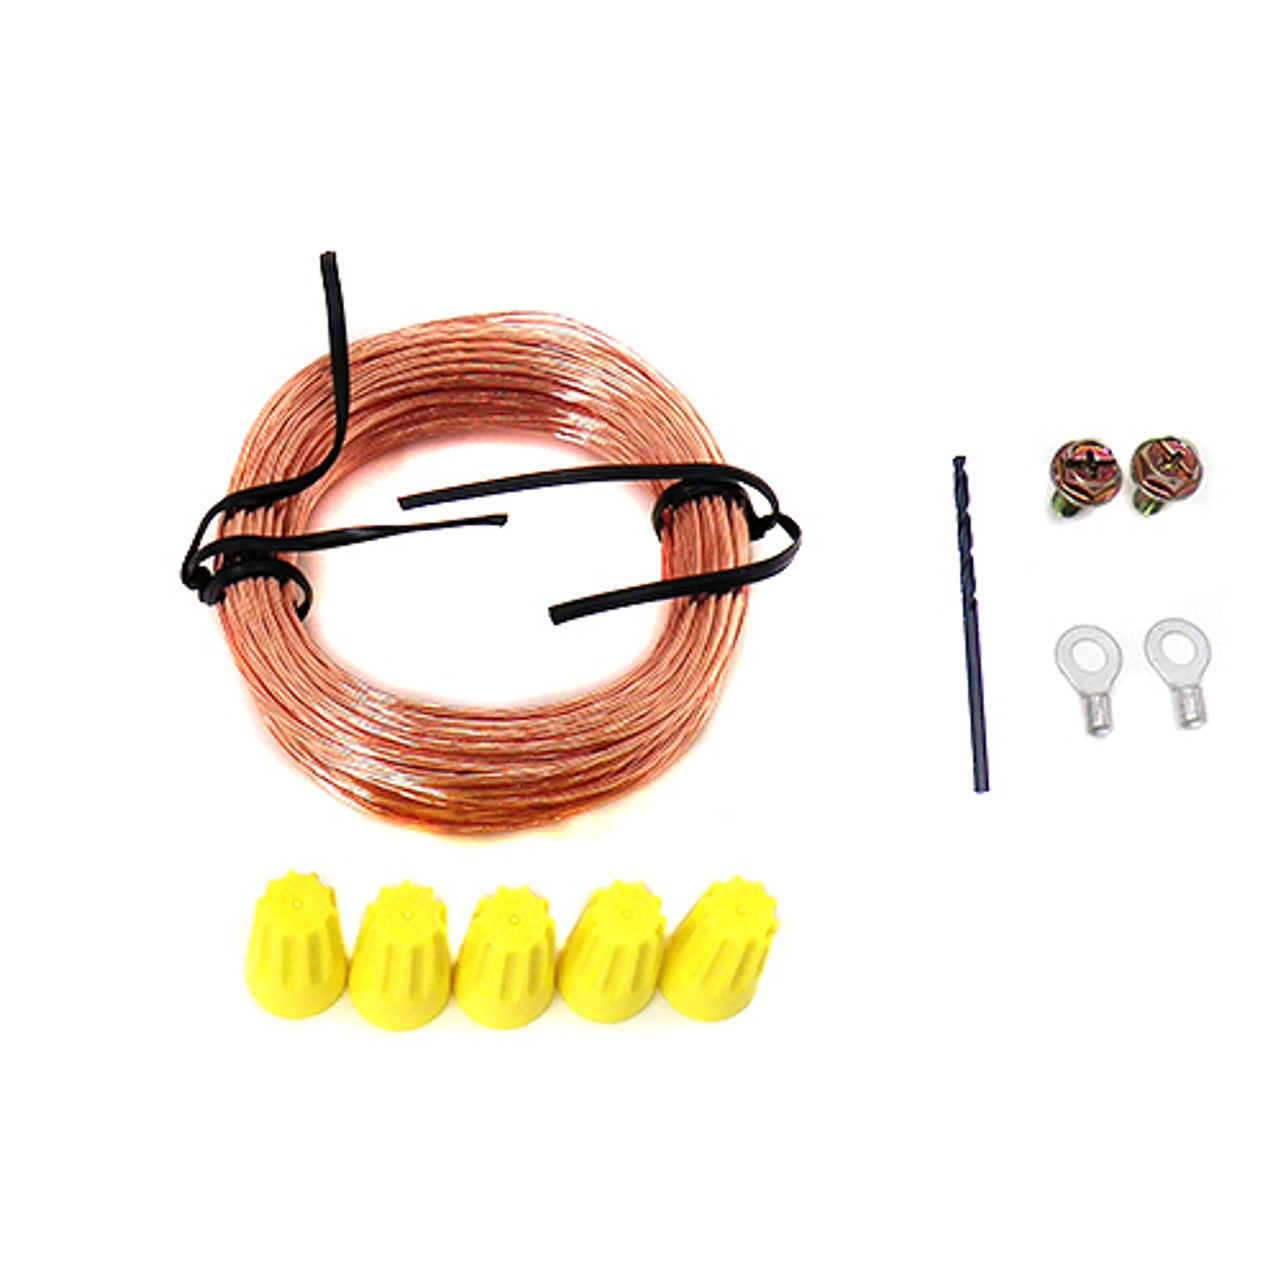 Dust Collection Hose Grounding Kit